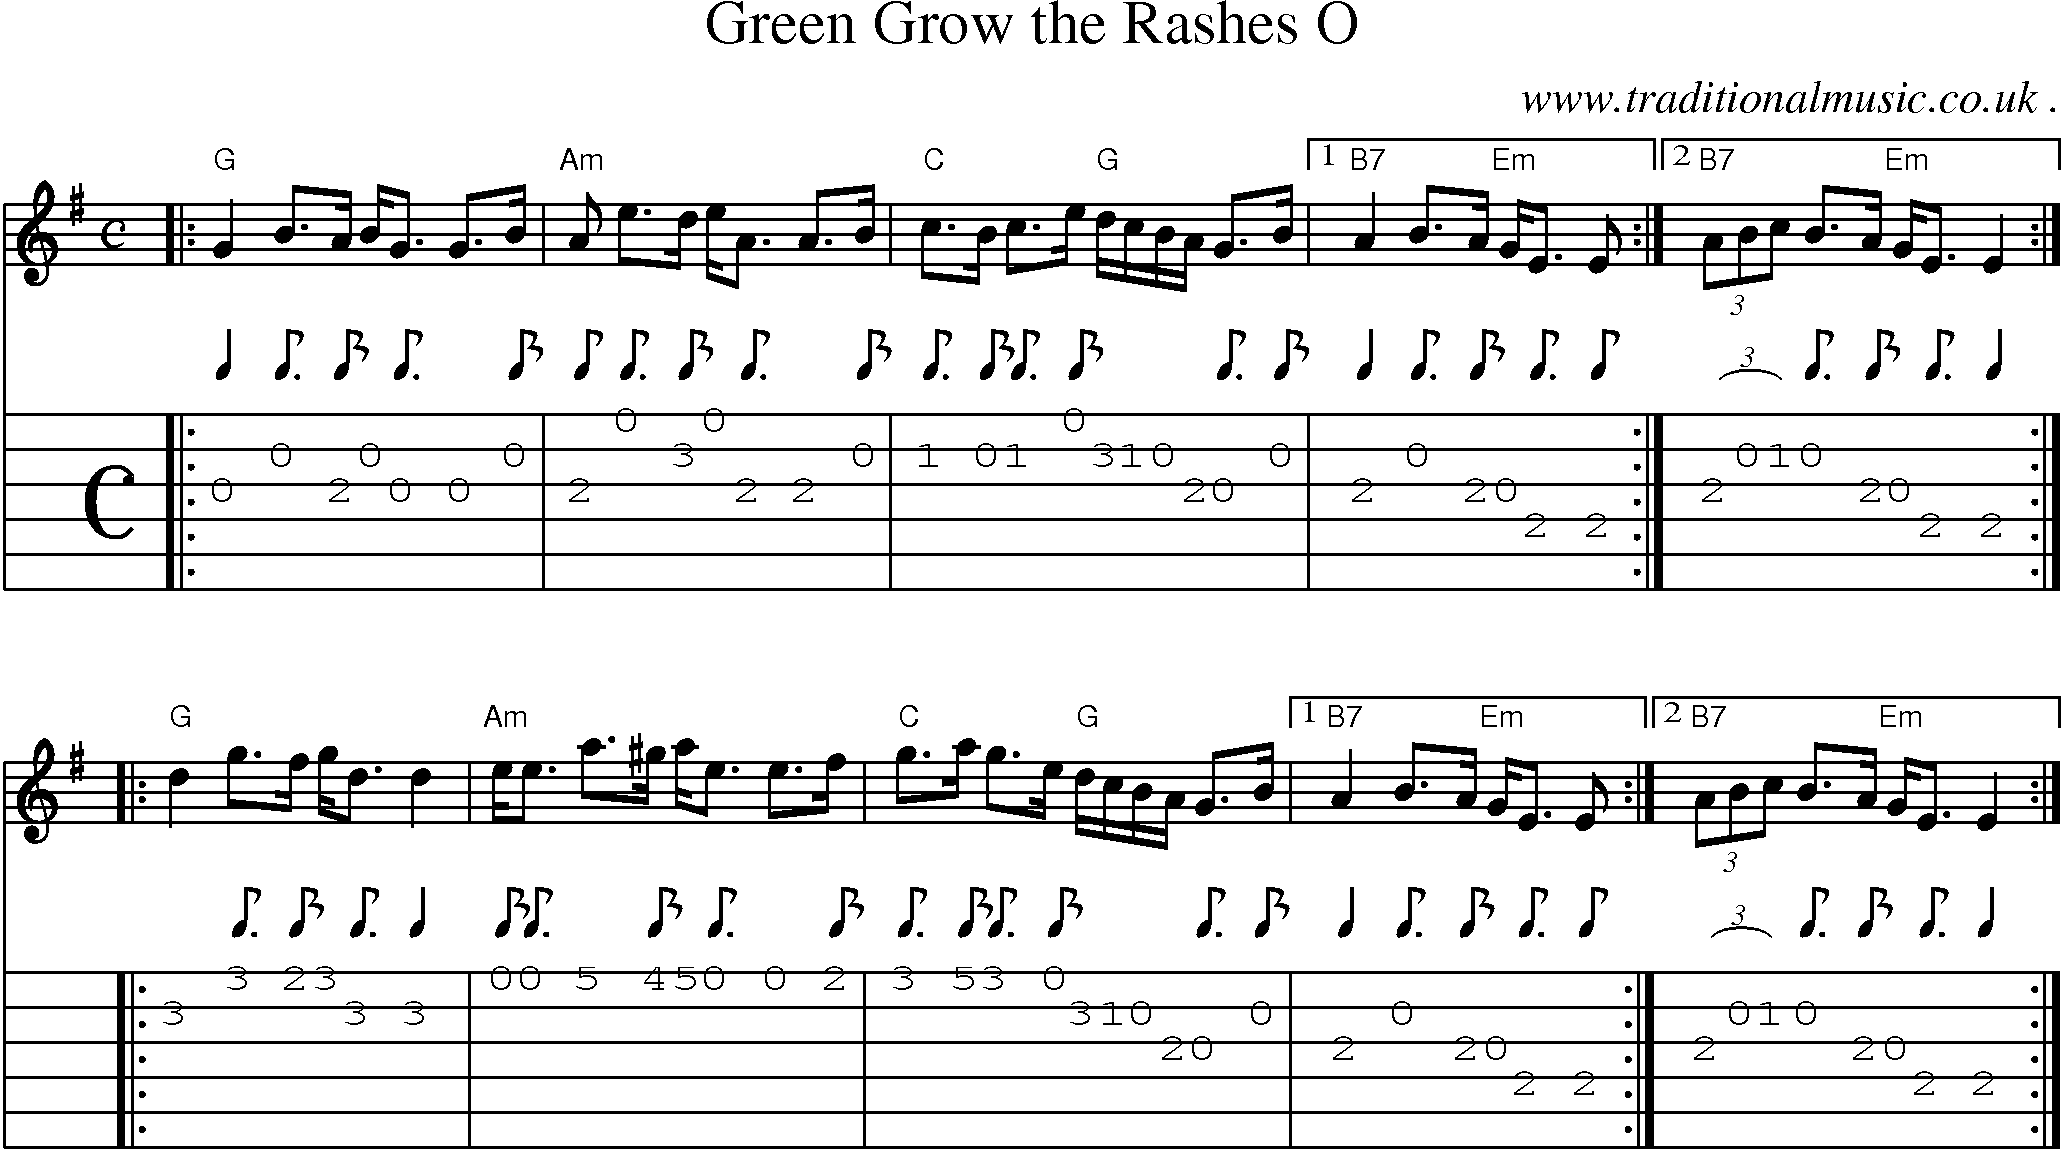 Sheet-music  score, Chords and Guitar Tabs for Green Grow The Rashes O